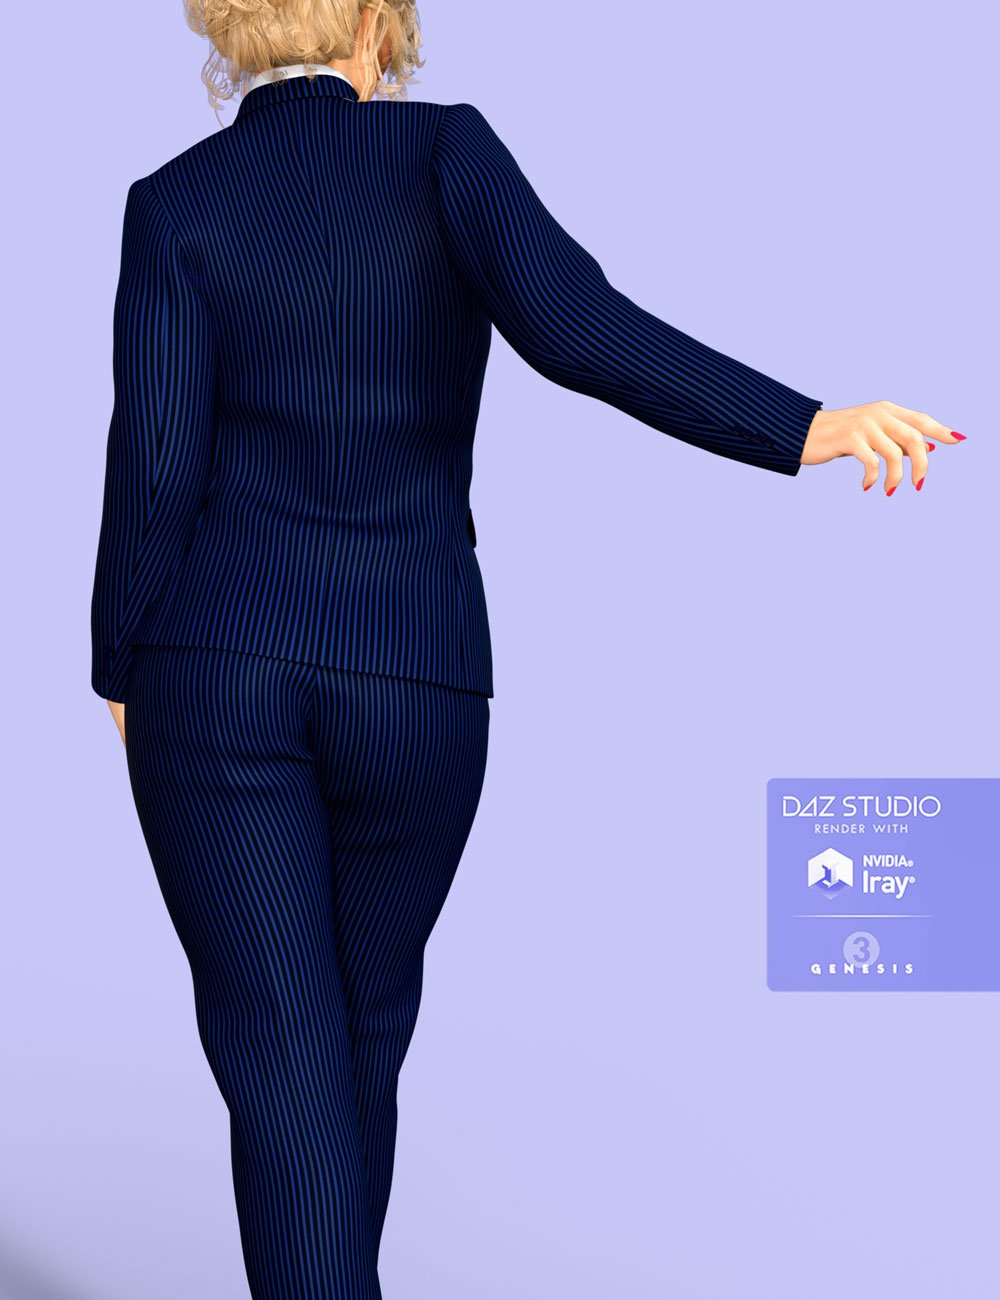 H&C Business Suit for Genesis 3 Female(s) by: IH Kang, 3D Models by Daz 3D